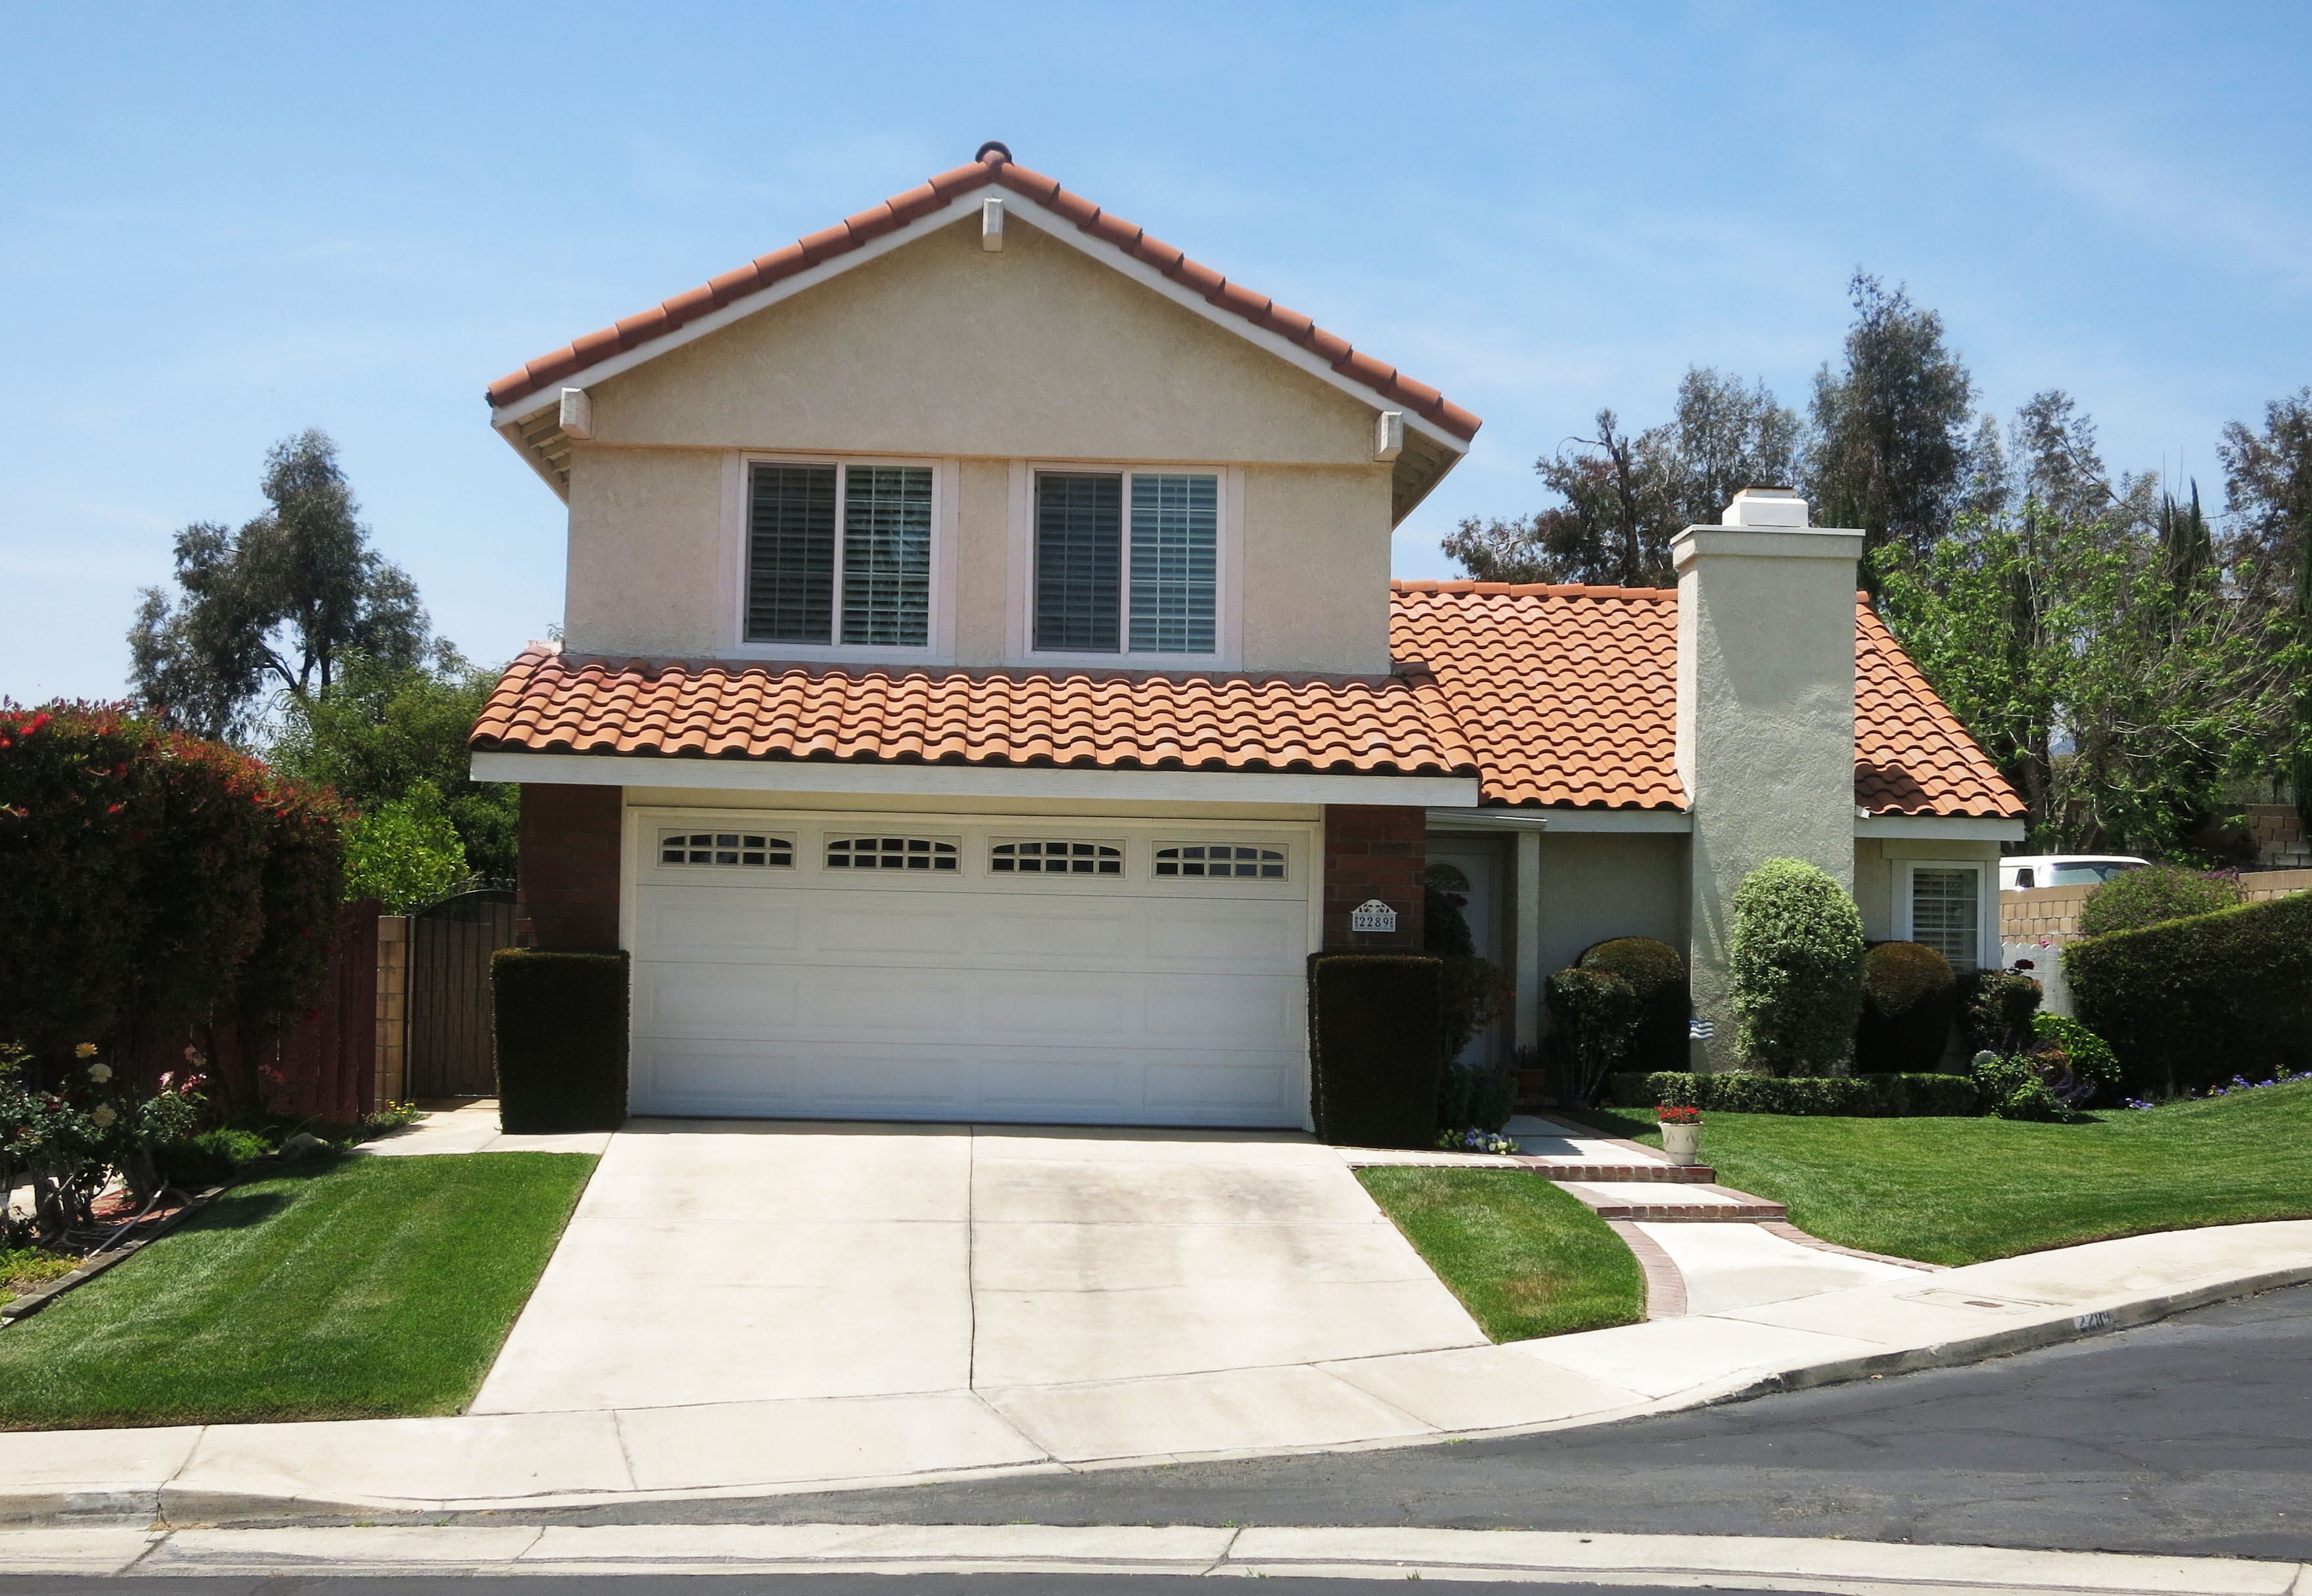 We Sold our Upland Home and Bought a New Home with Anne Hwang-Burnell